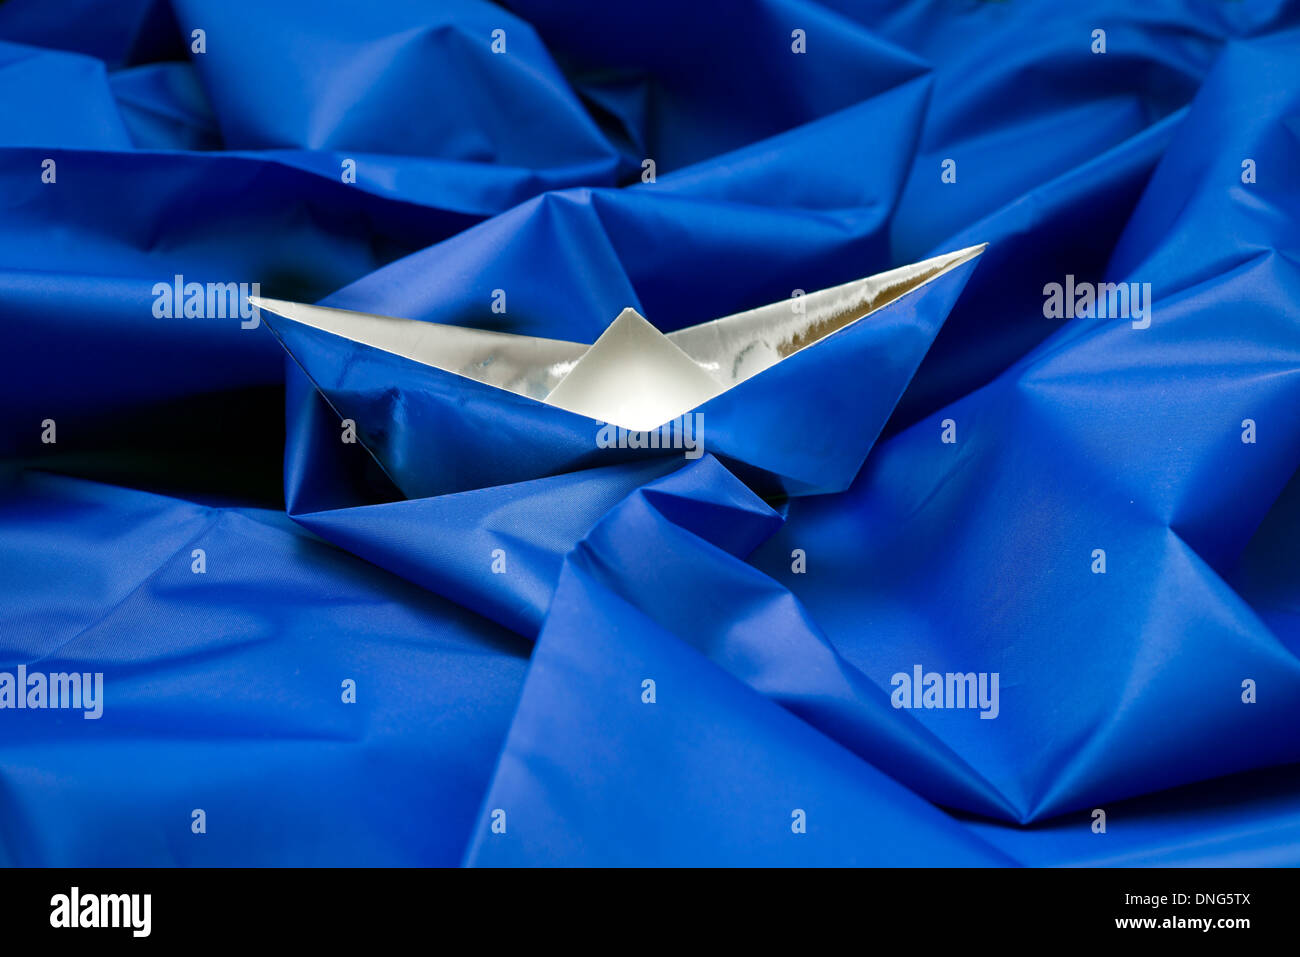 Paper boat on blue fabric Stock Photo